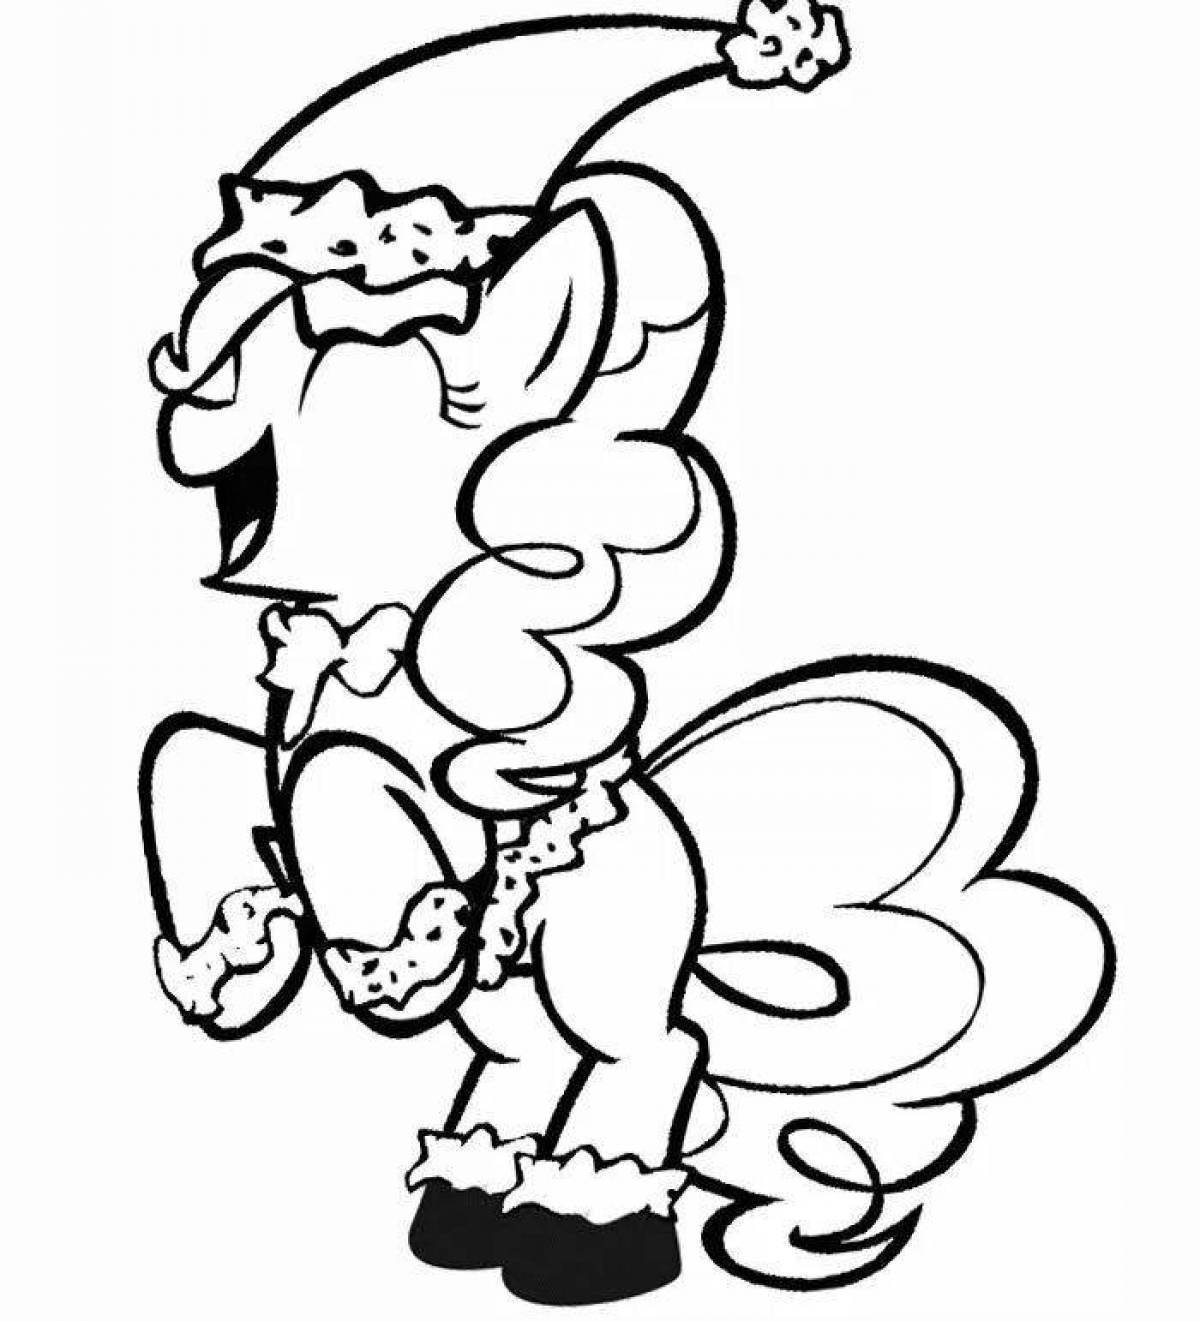 Coloring book magical Christmas ponies